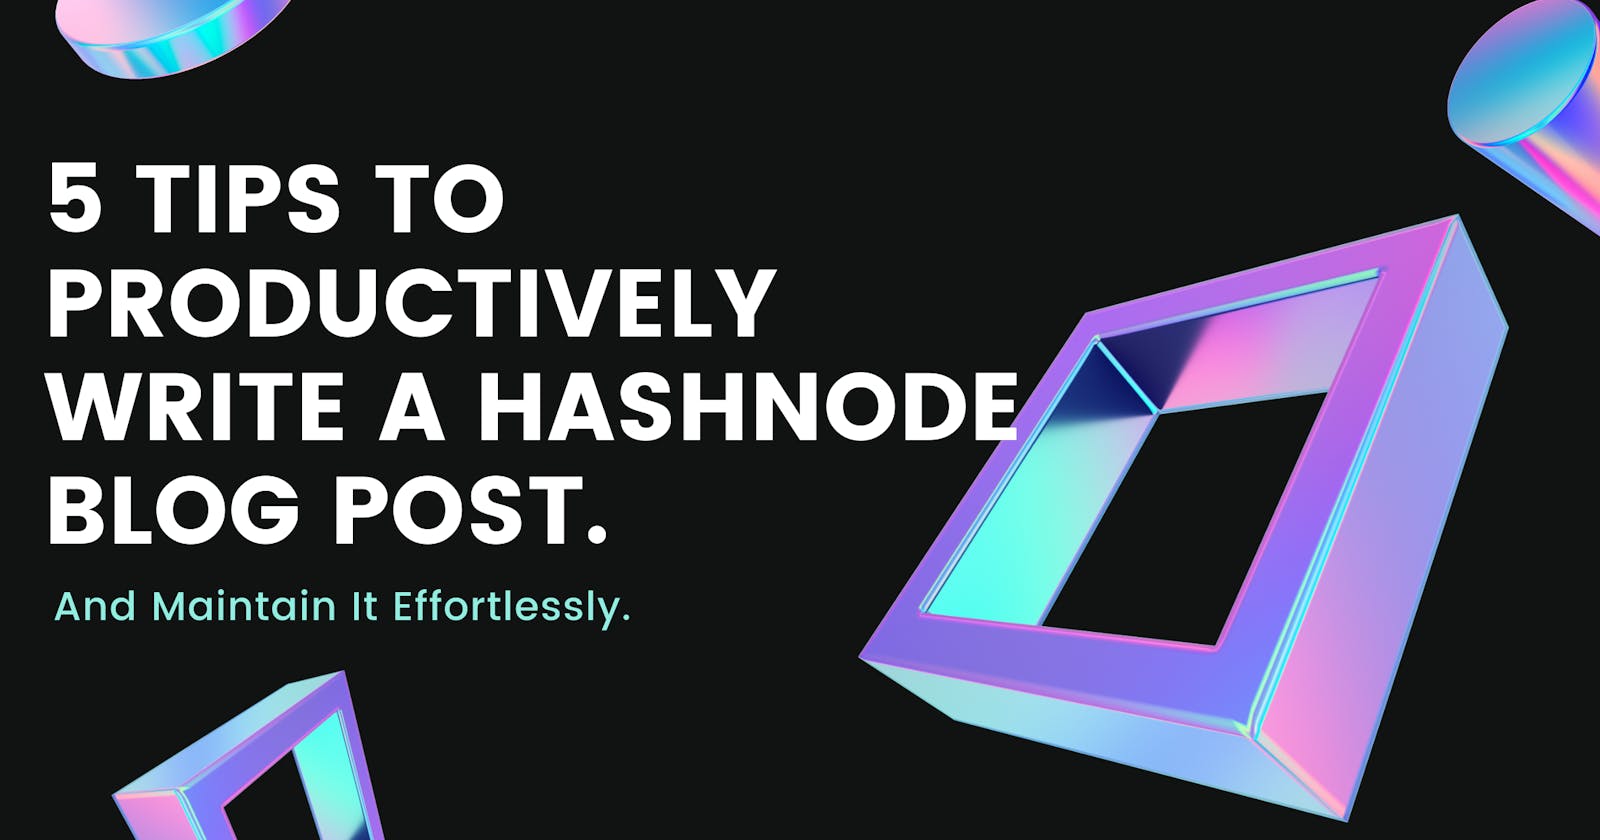 5 Tips To Productively Write A Hashnode Blog Post.